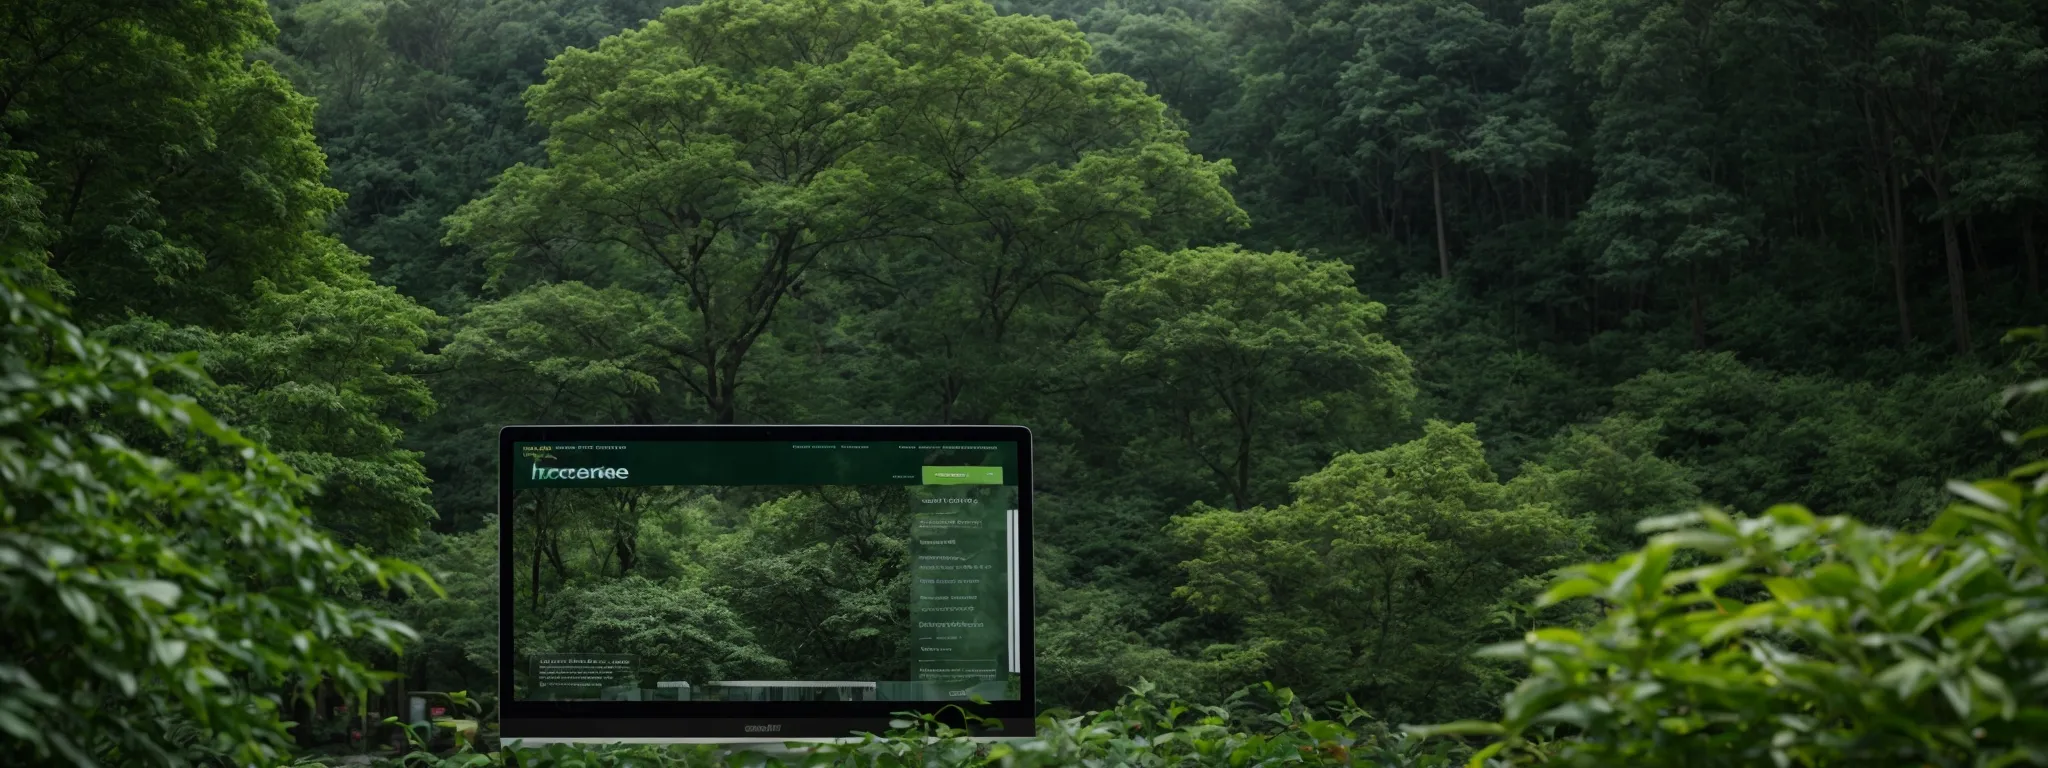 a computer screen displaying a tree care website with various service options against a backdrop of lush green foliage.